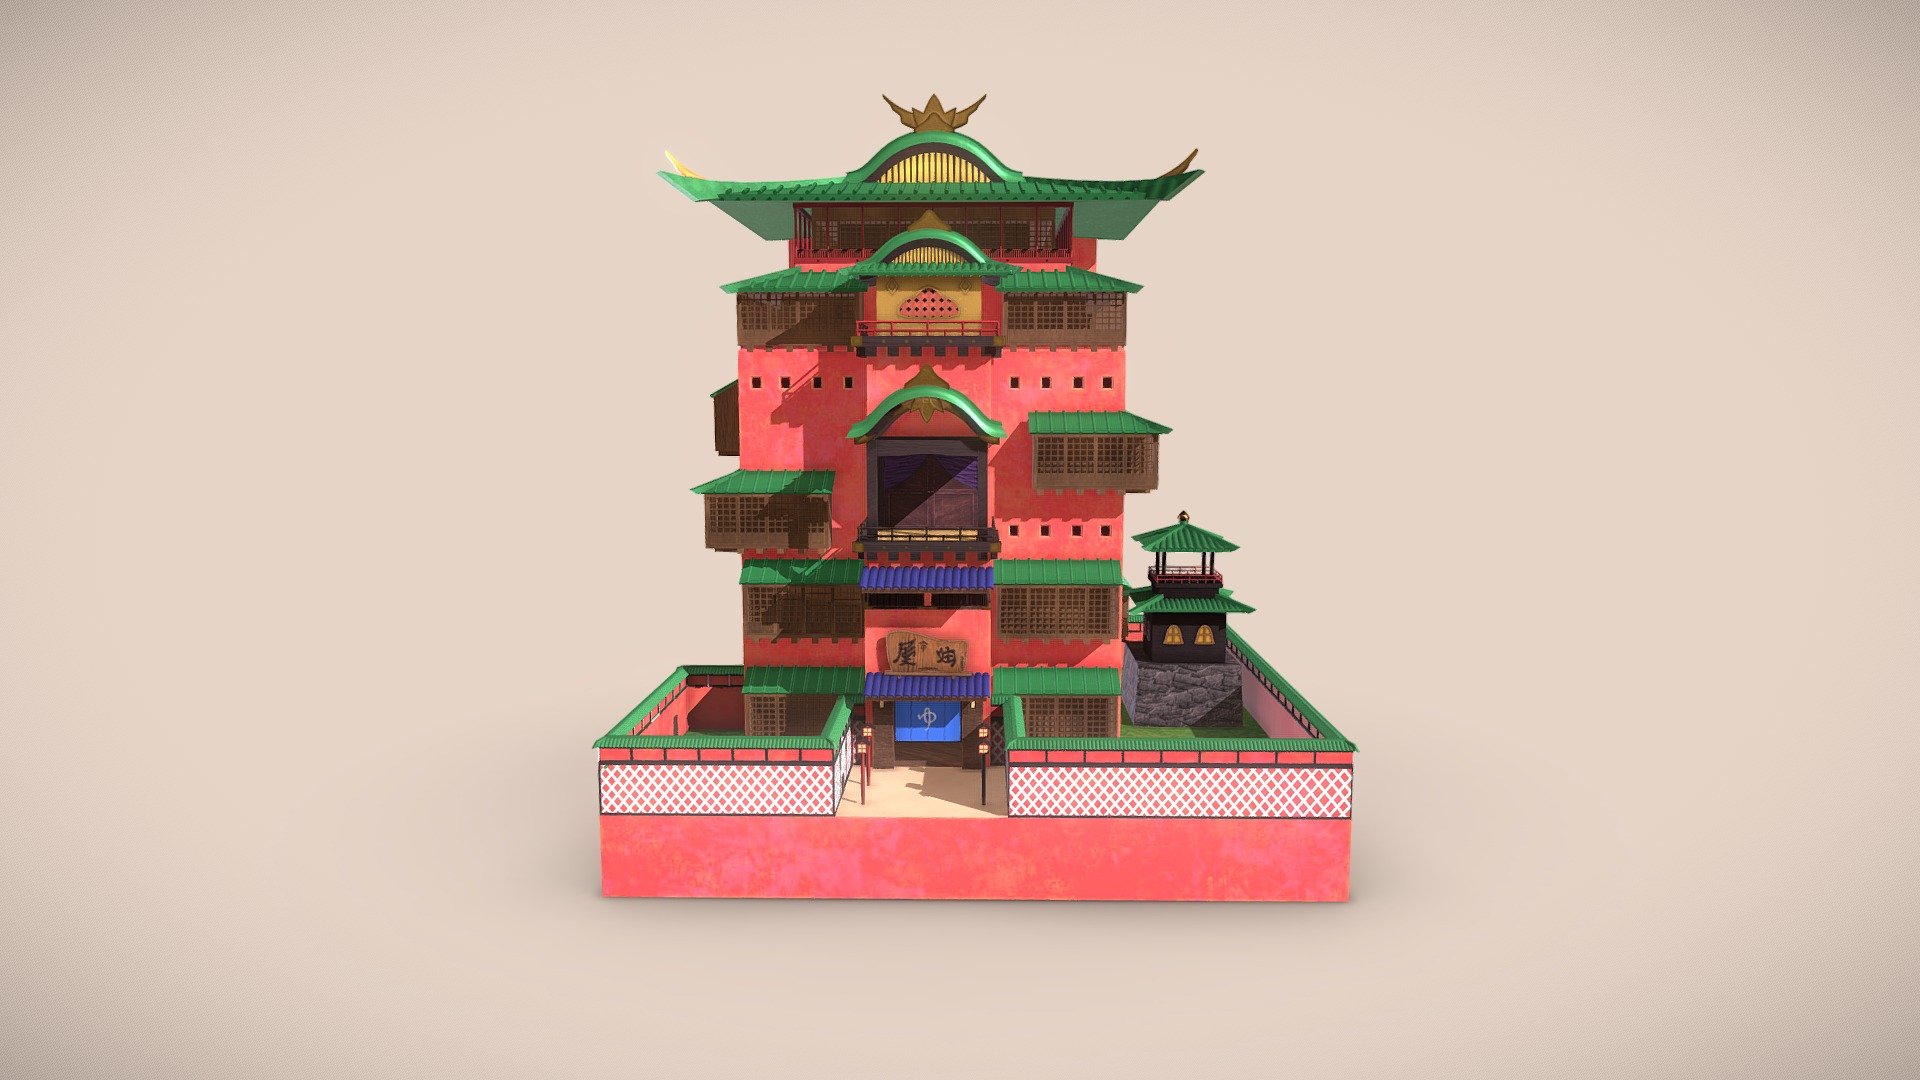 3D Moldel - The Bathhouse from Spirited Away - -The Bathhouse from Spirited Away- - 3D model by Alex_Rabasa 3d model